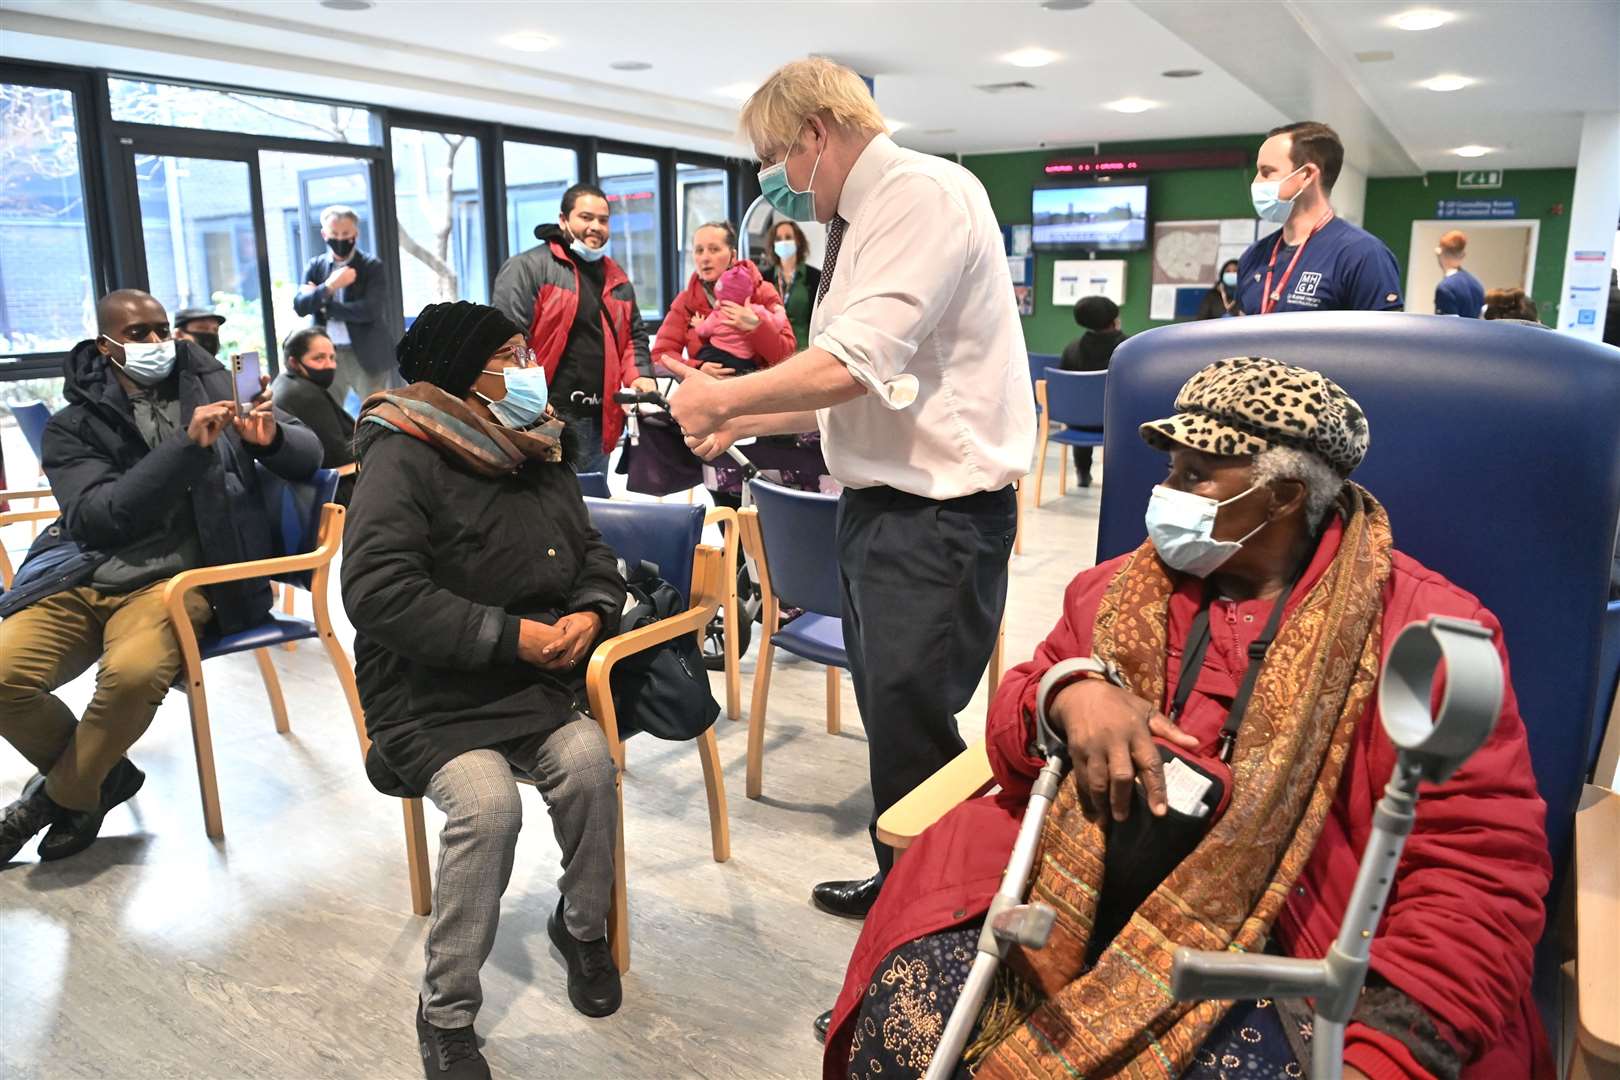 Prime Minister Boris Johnson speaks to a member of the public during a visit to Lordship Lane Primary Care Centre in north London during a booster vaccine session (Paul Grover/Daily Telegraph/PA)